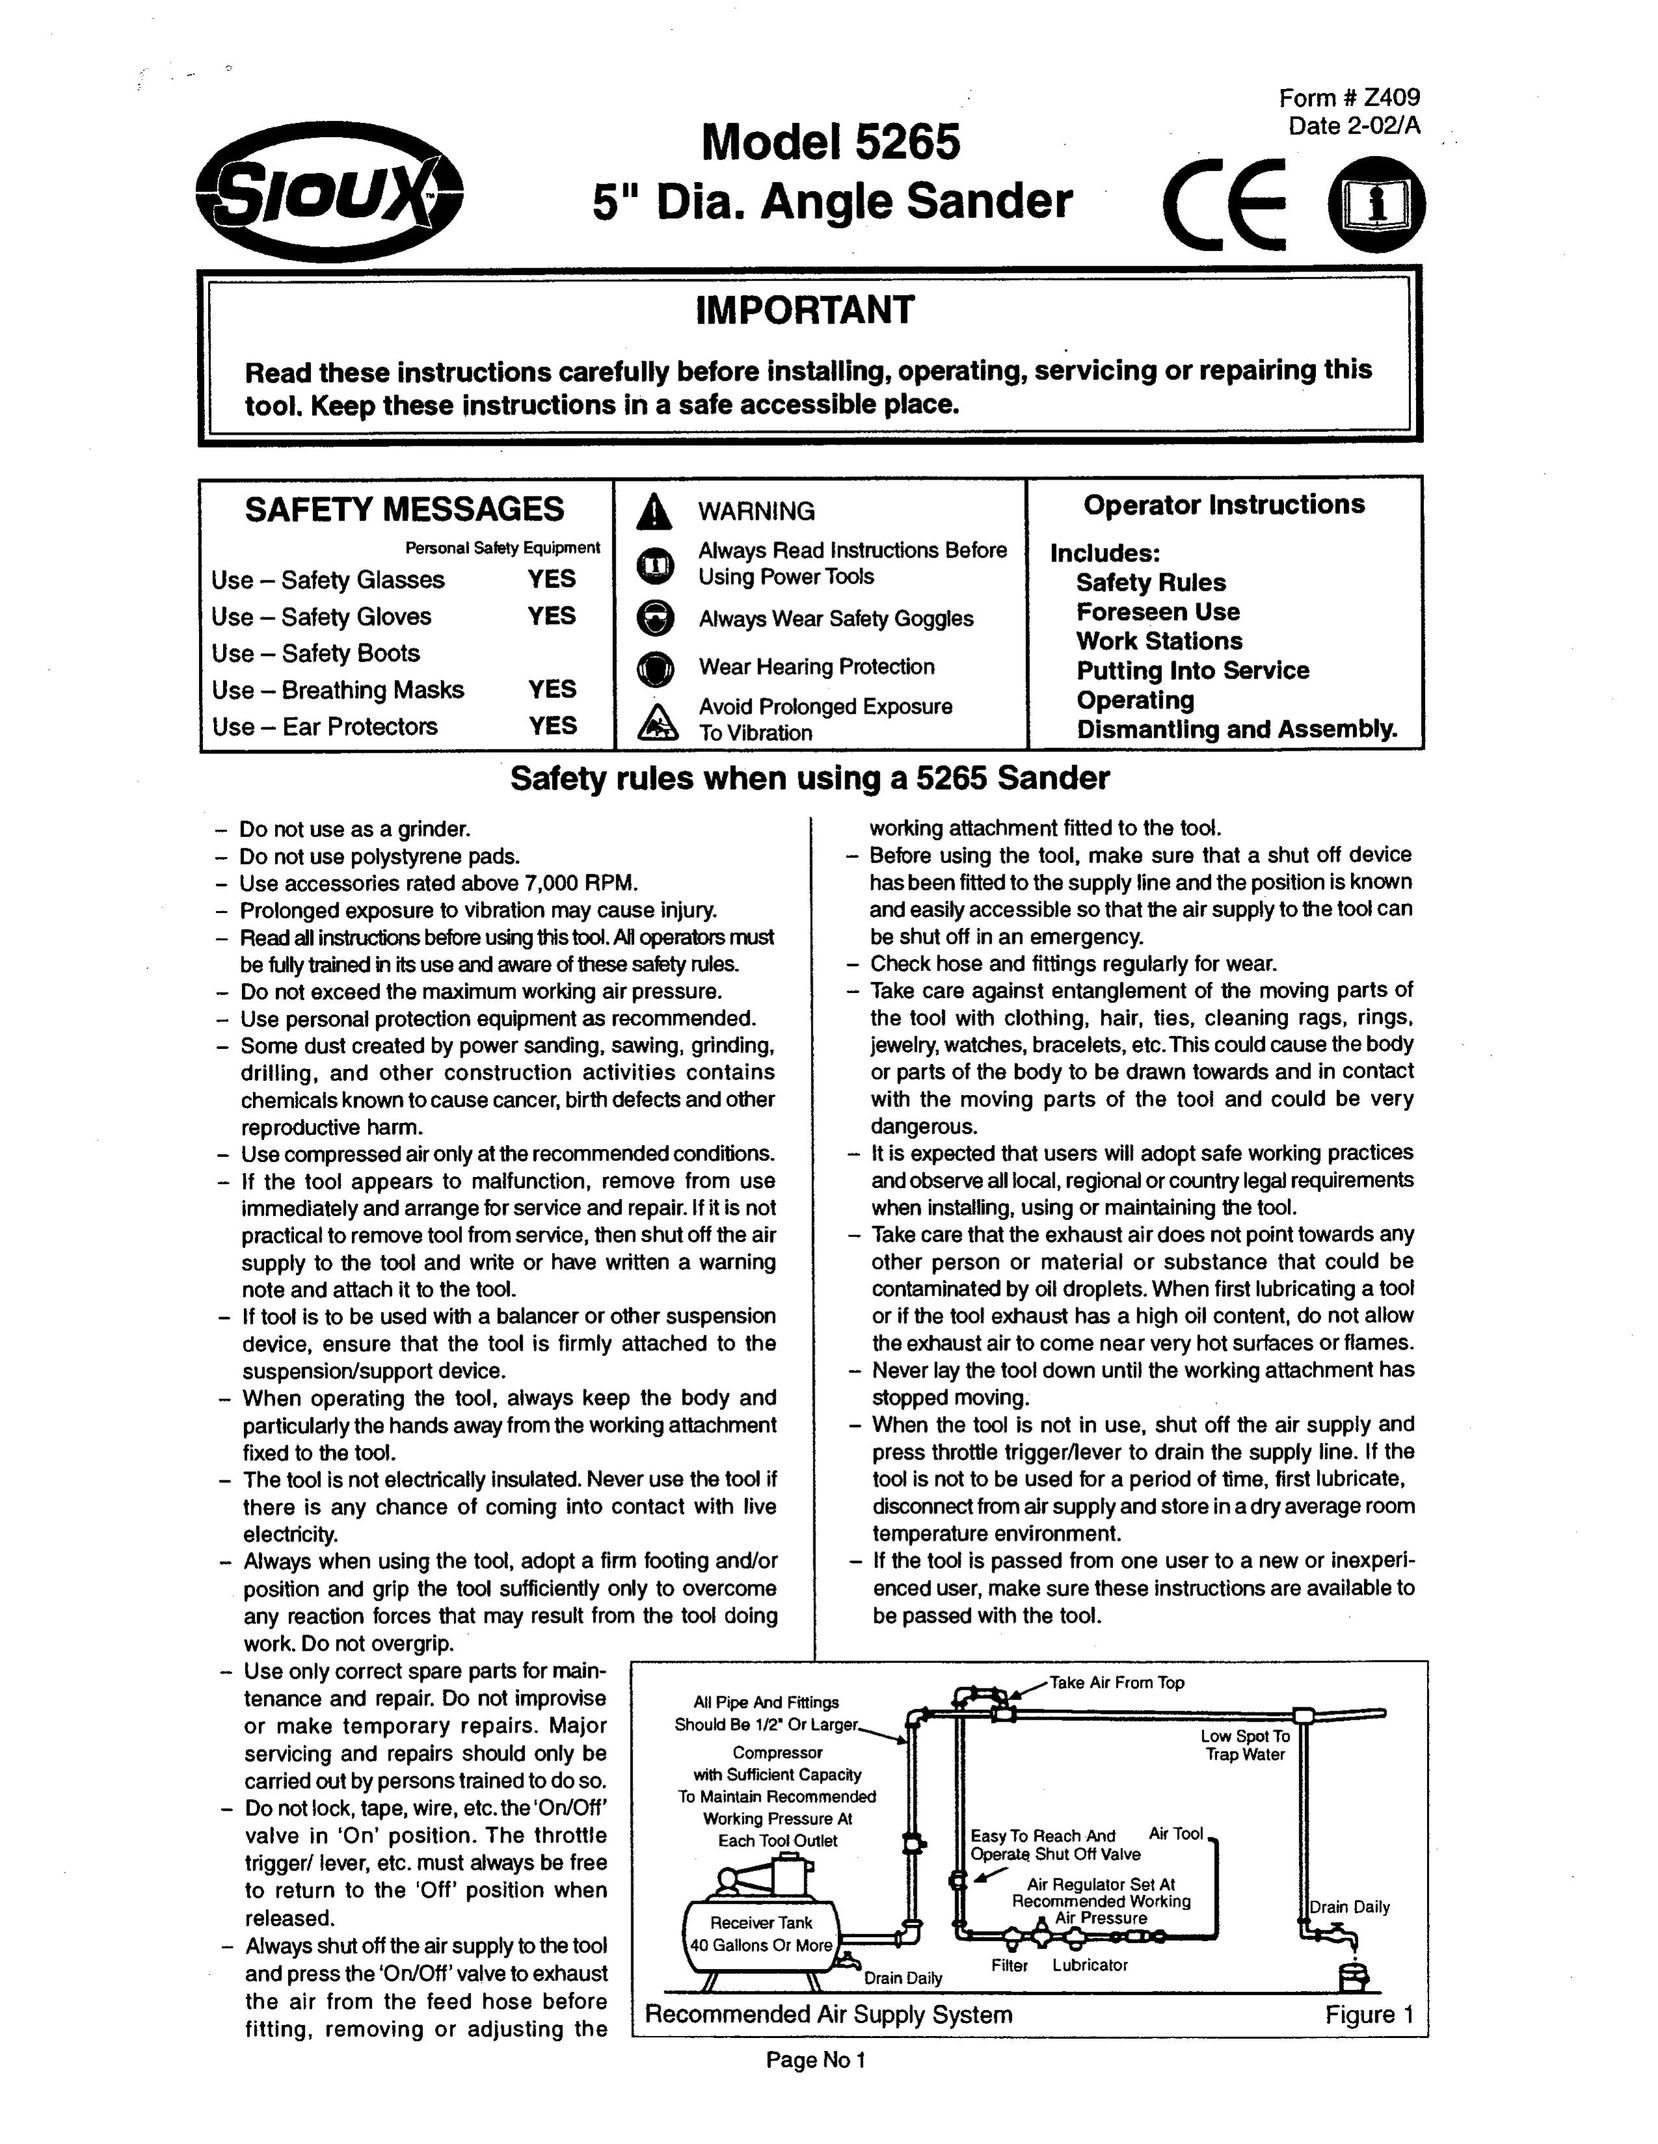 Sioux Tools 5265 Sander User Manual